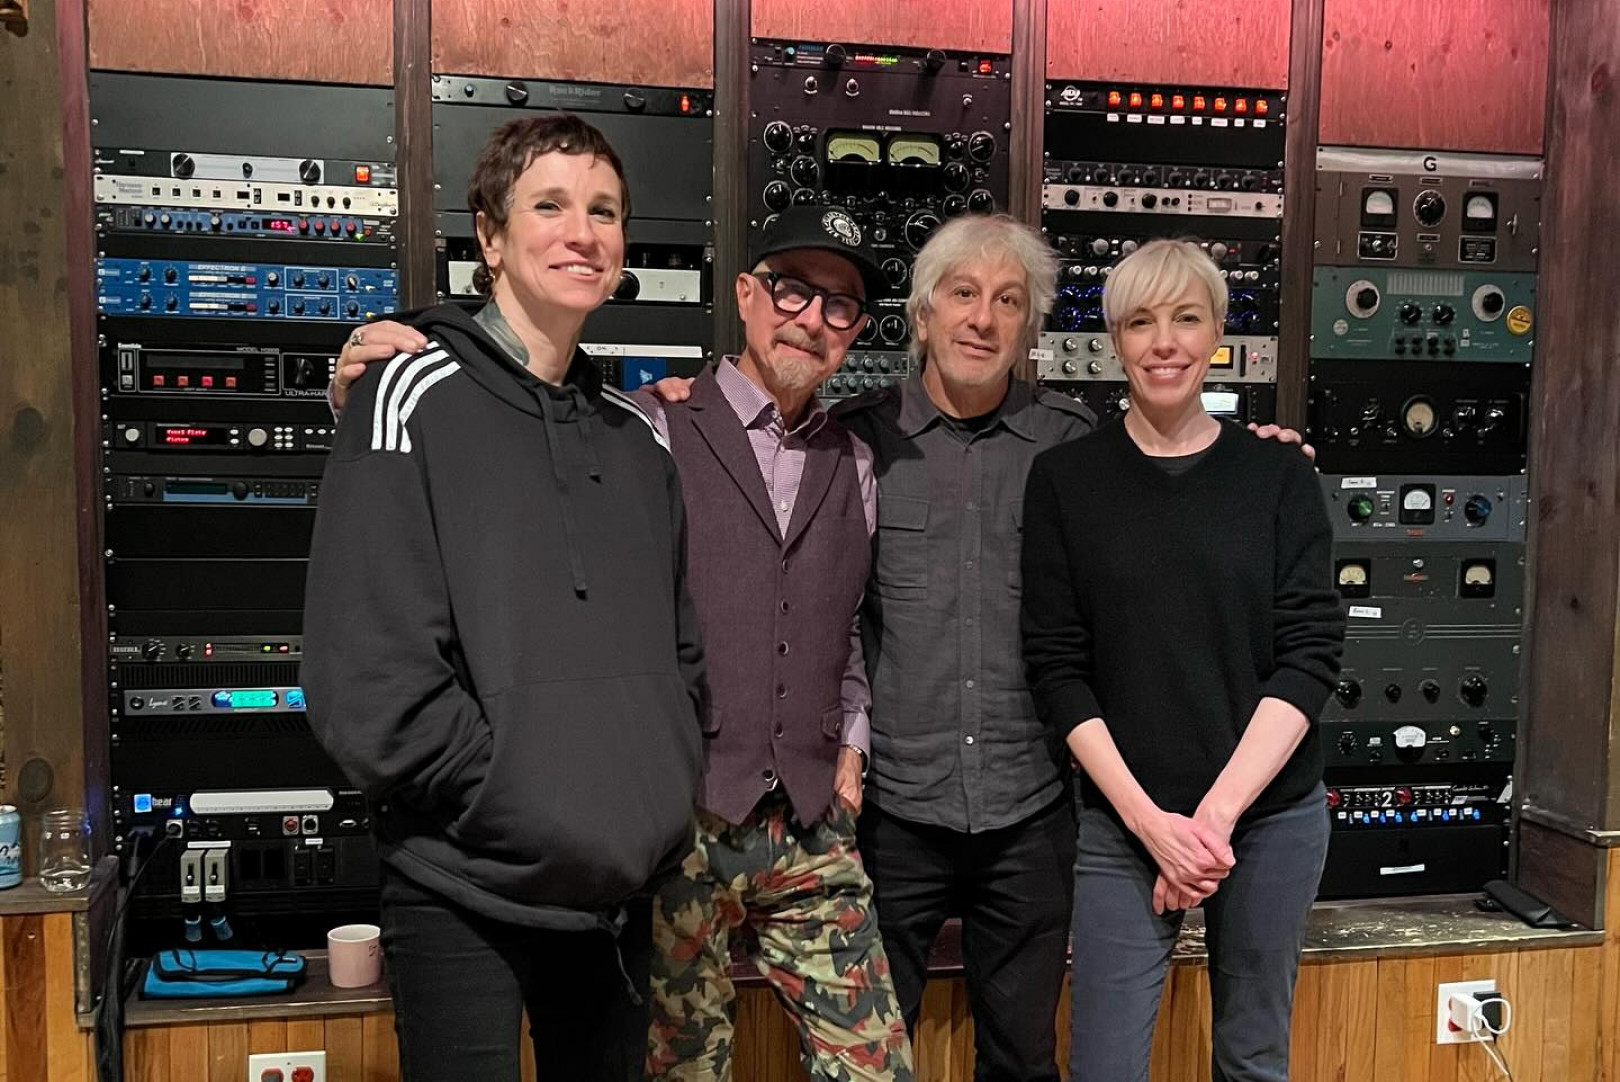 Kathi Wilcox, LJG, Lee Renaldo, Jay Dee Daugherty record song for Red Hot